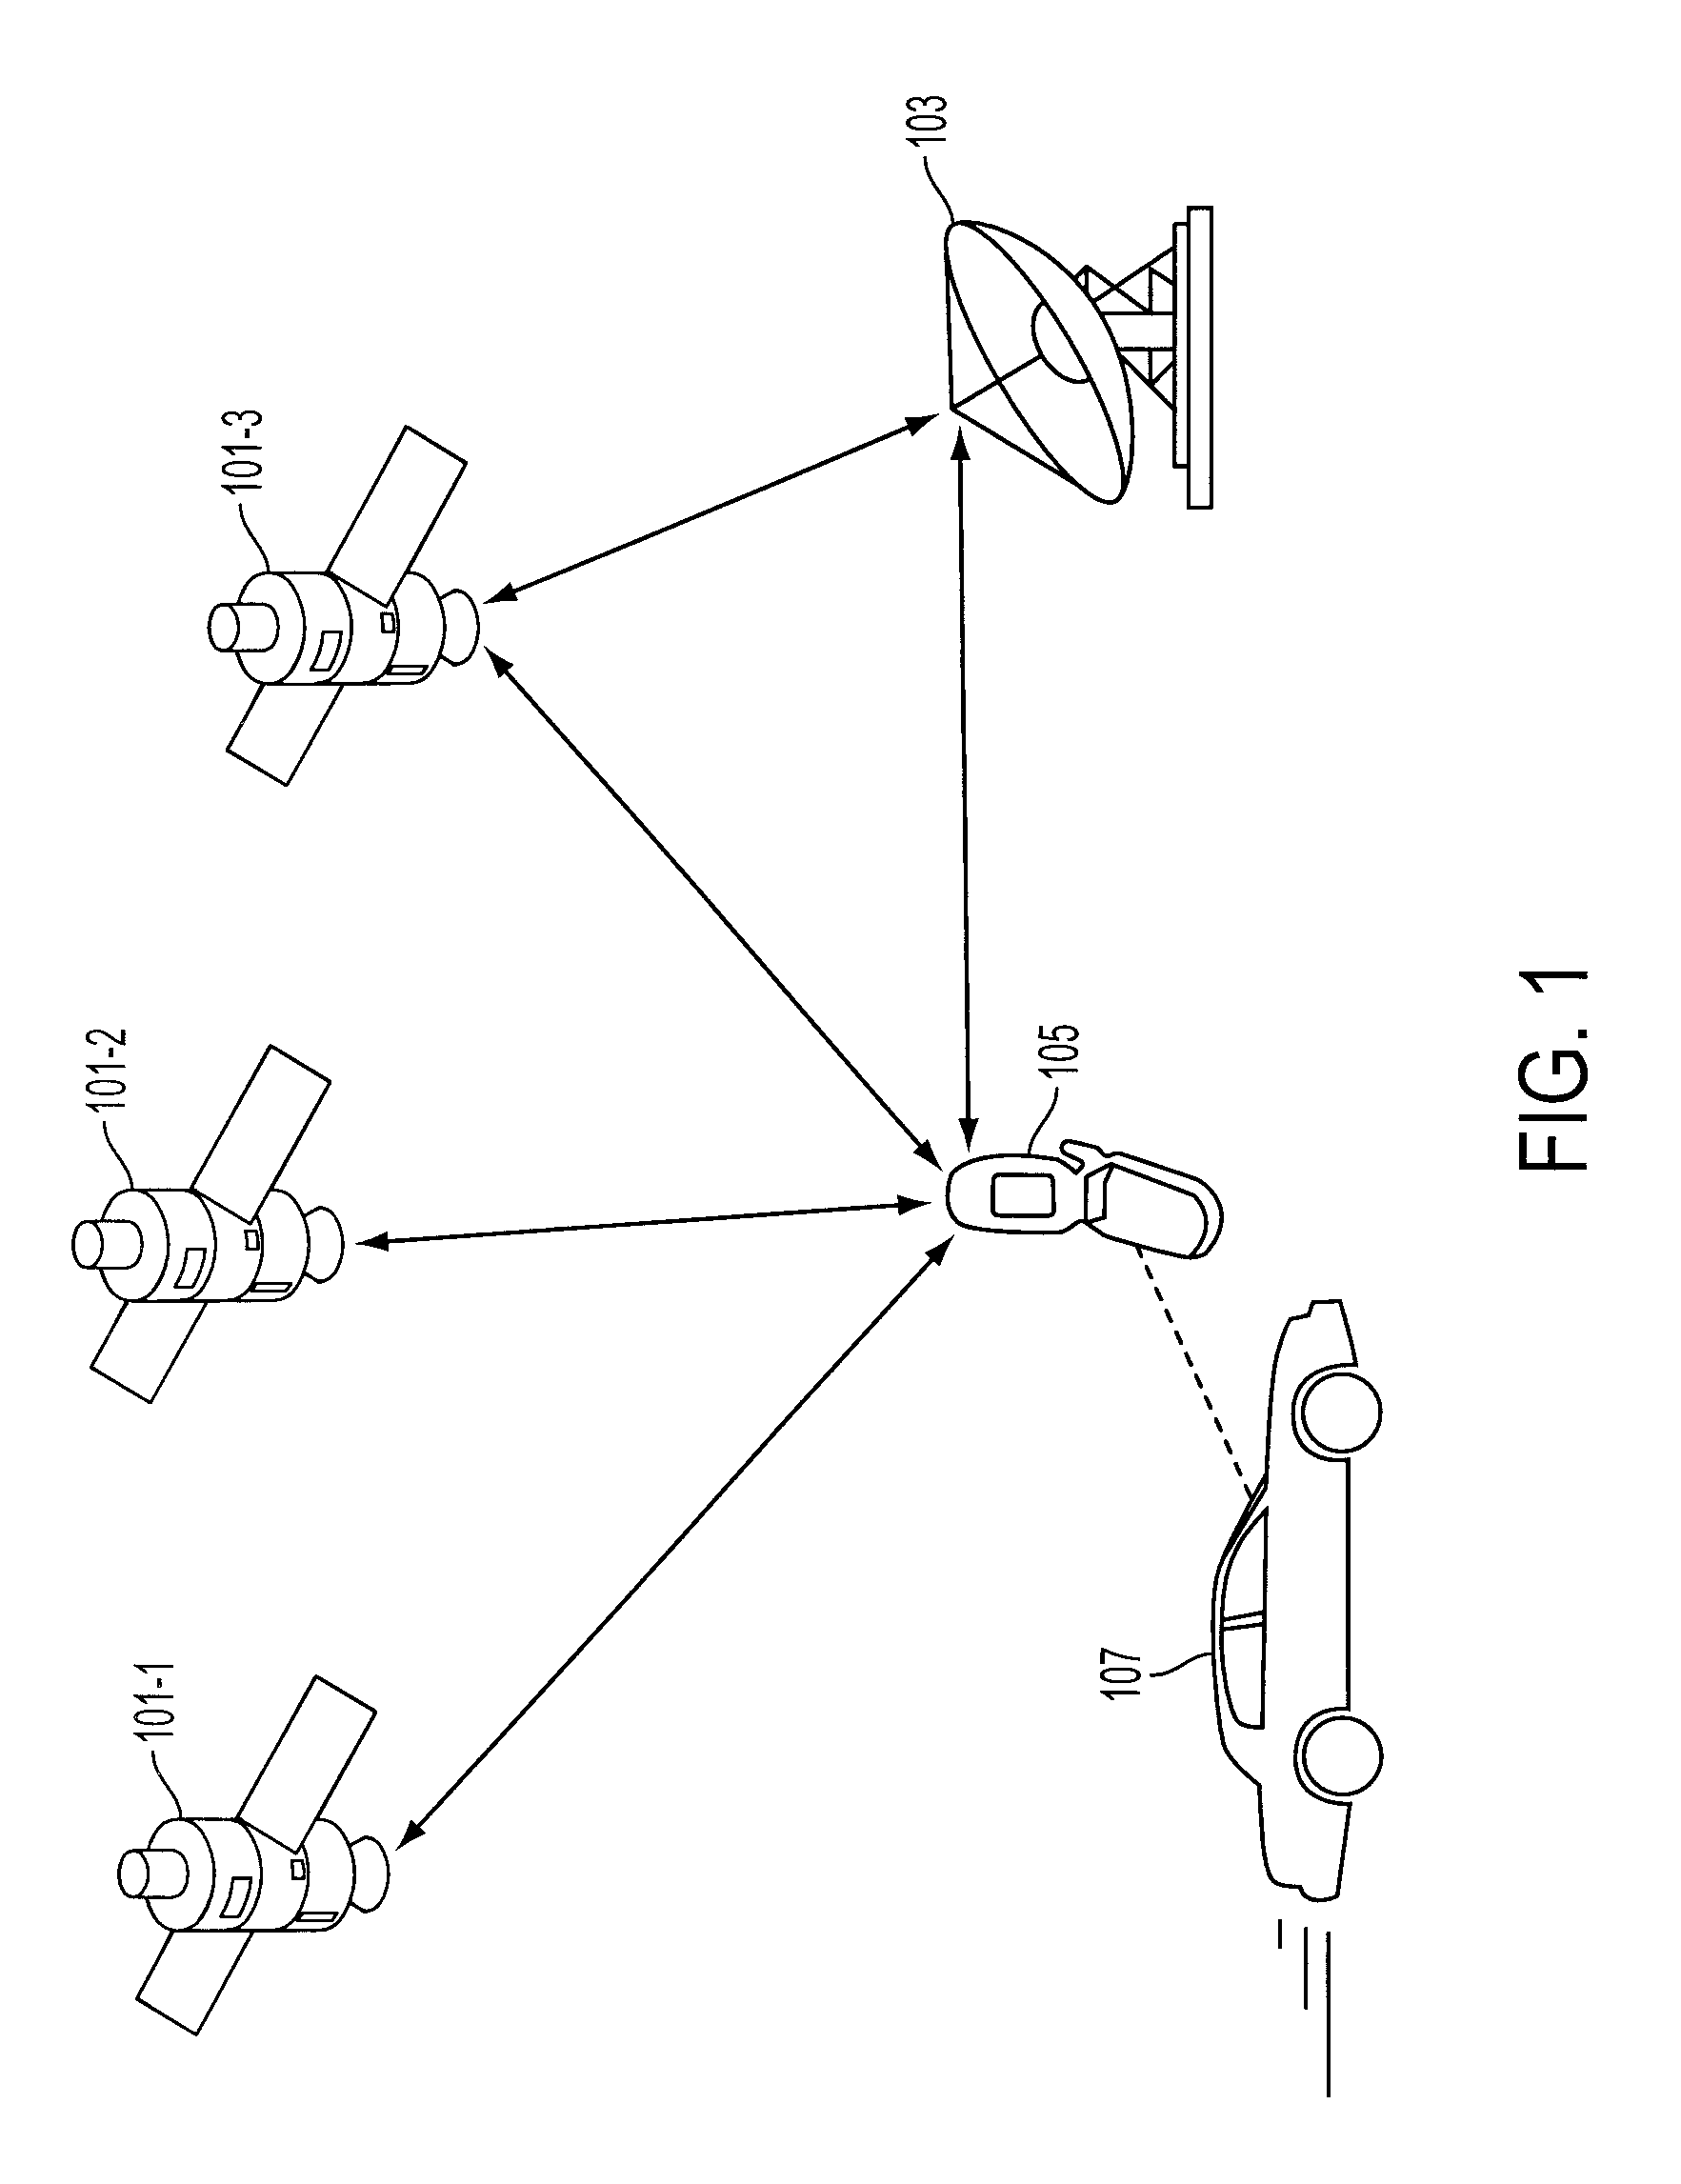 Managing Device Functionality During Predetermined Conditions